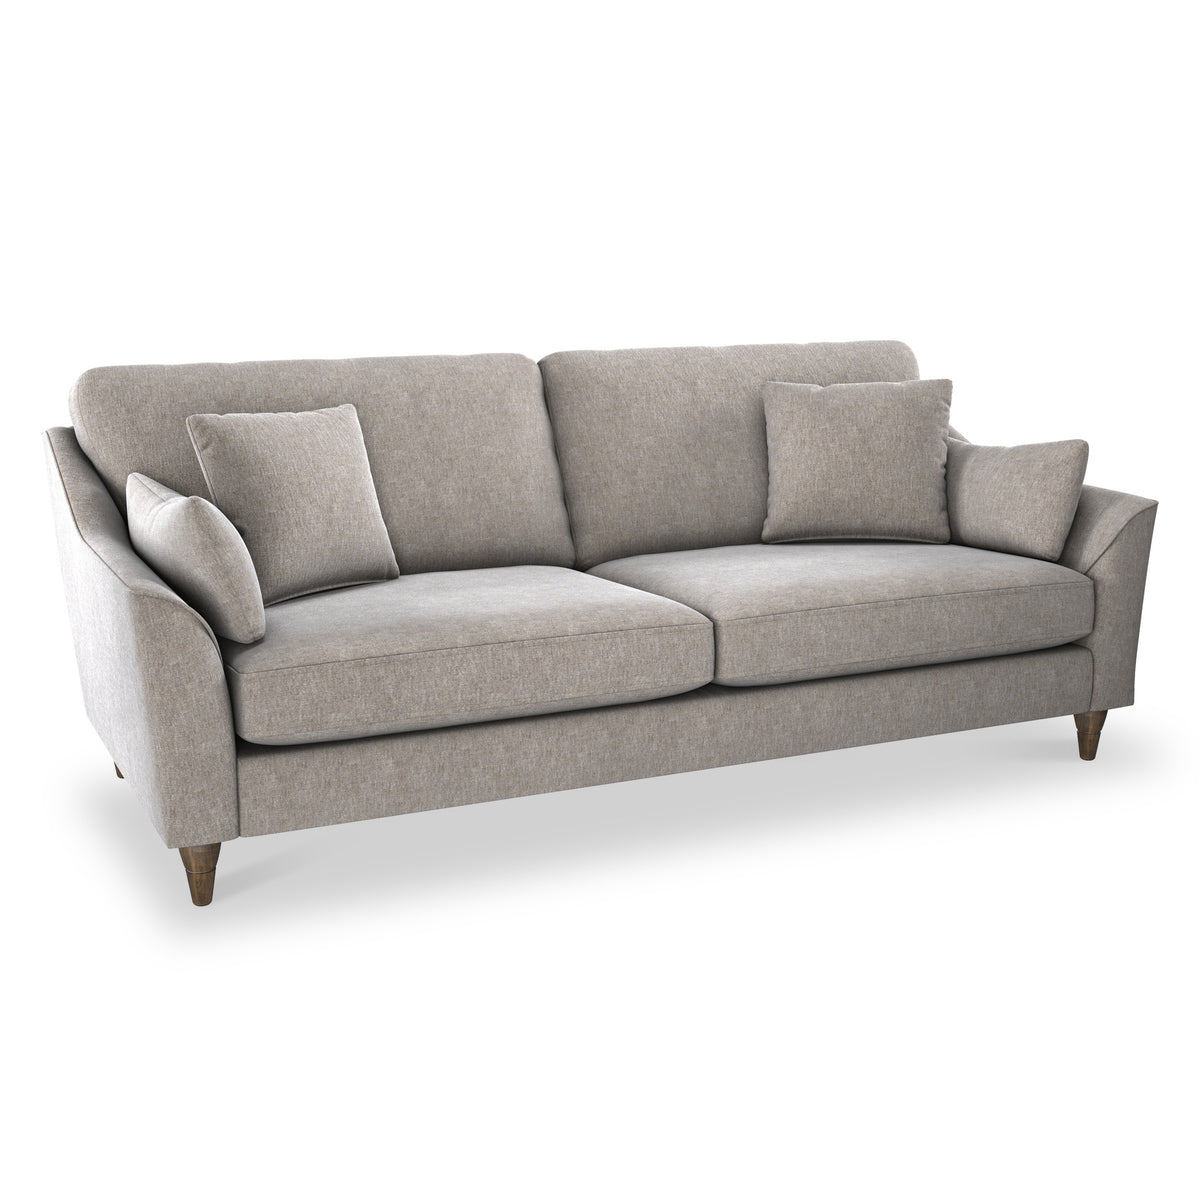 Charice Fog Grey 3 Seater Sofa from Roseland Furniture